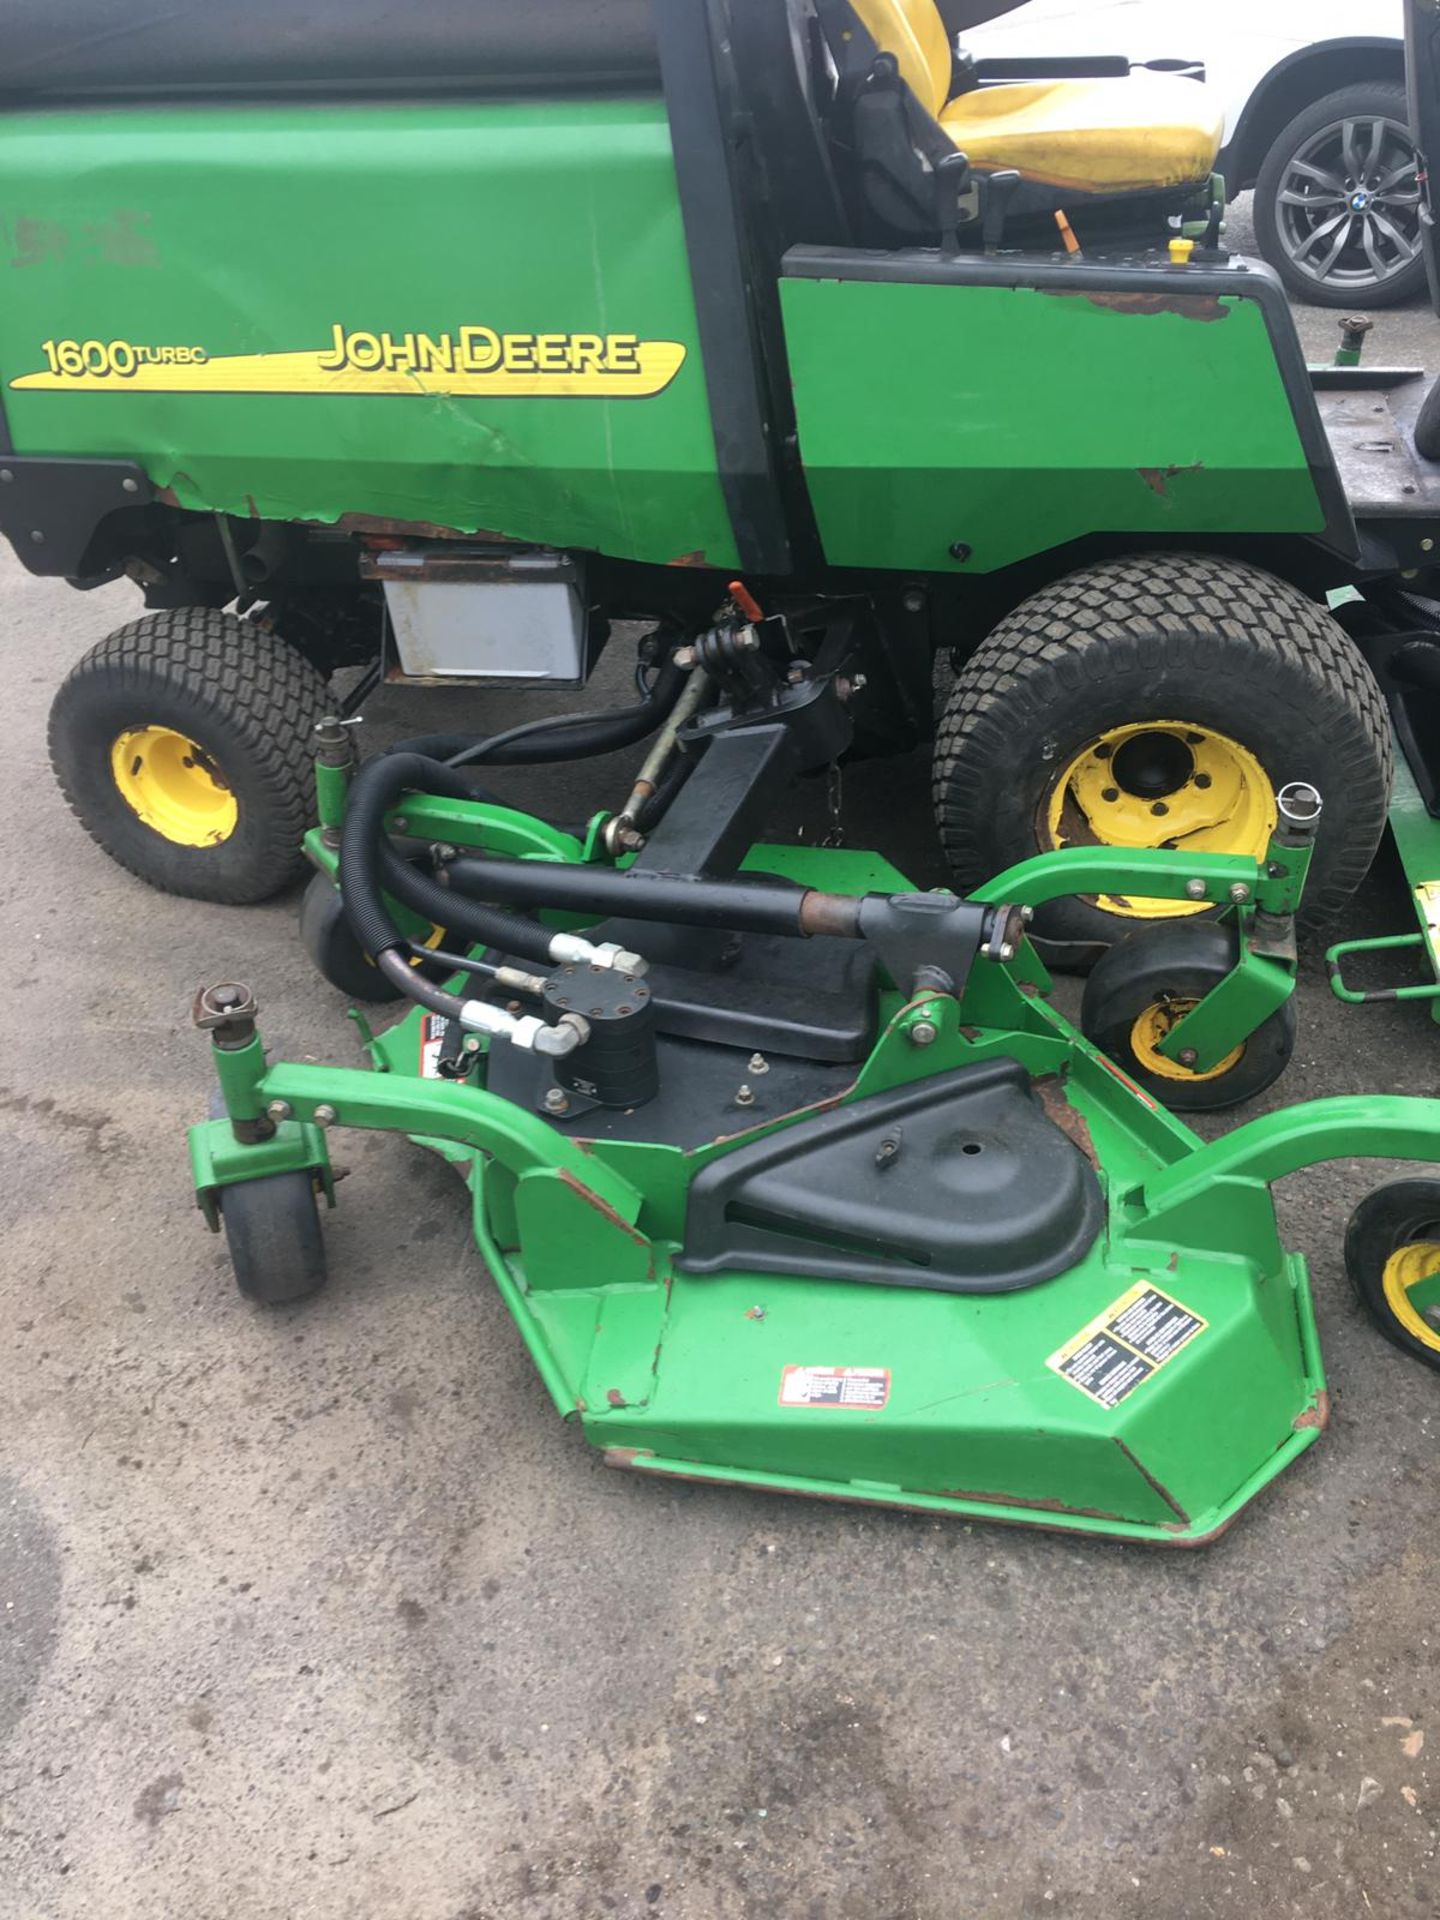 JOHN DEERE 1600 WIDE AREA TURBO BATWING RIDE ON LAWN MOWER, CRUISE CONTROL, RUNS & WORKS *NO VAT* - Image 7 of 24